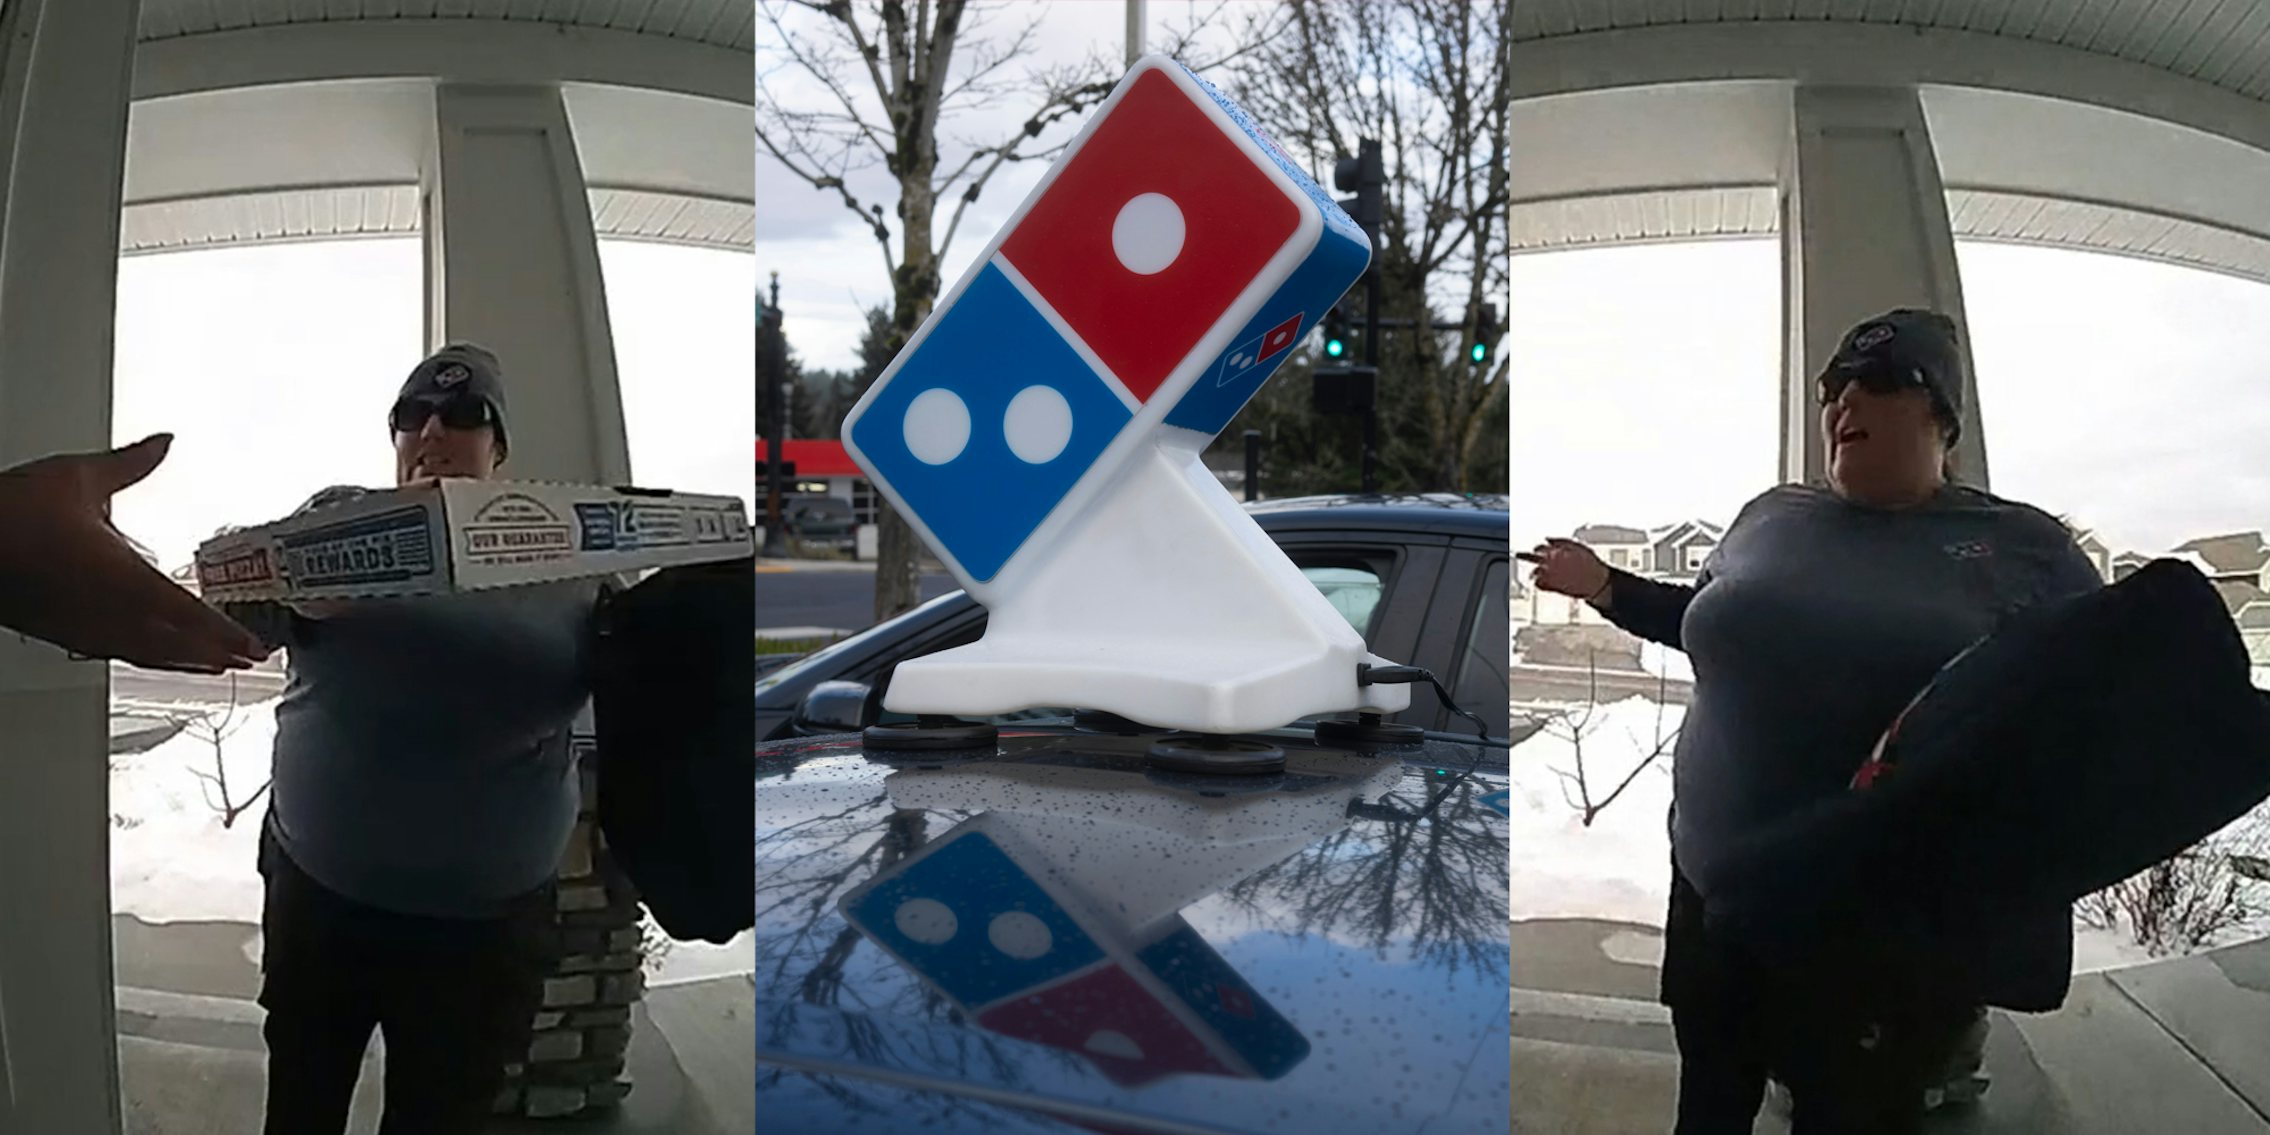 Domino's delivery driver handing customer pizza at door (l) Domino's delivery car with logo on top (c) Domino's delivery driver speaking to customer at door pointing to car (r)